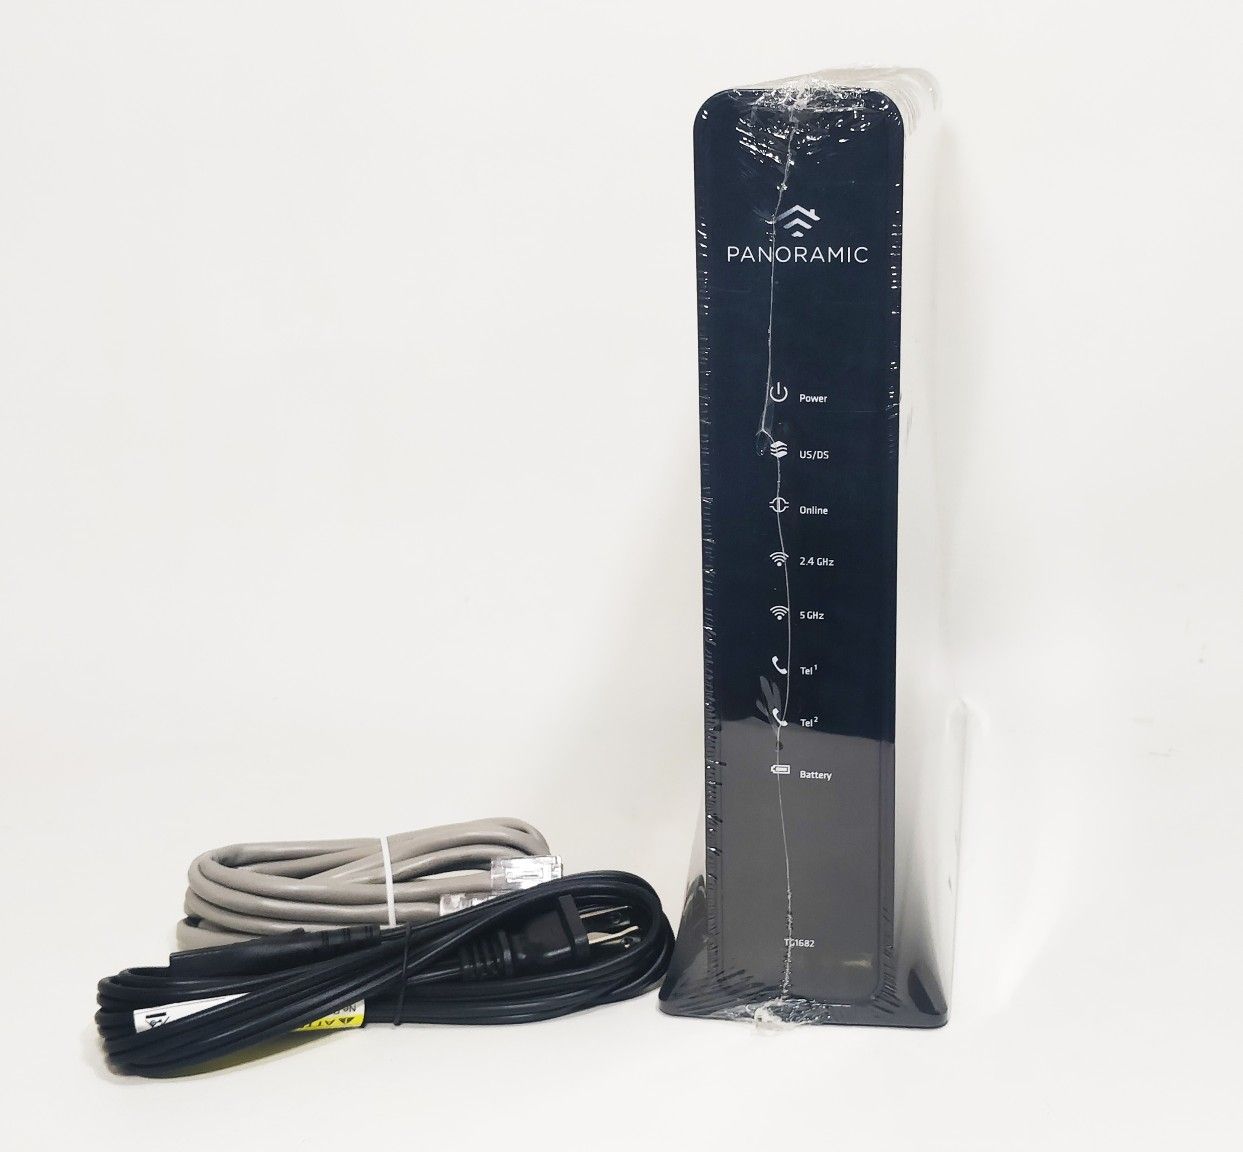 ARRIS TG1682G Wireless Cable Modem - Not for Cox or Comcast